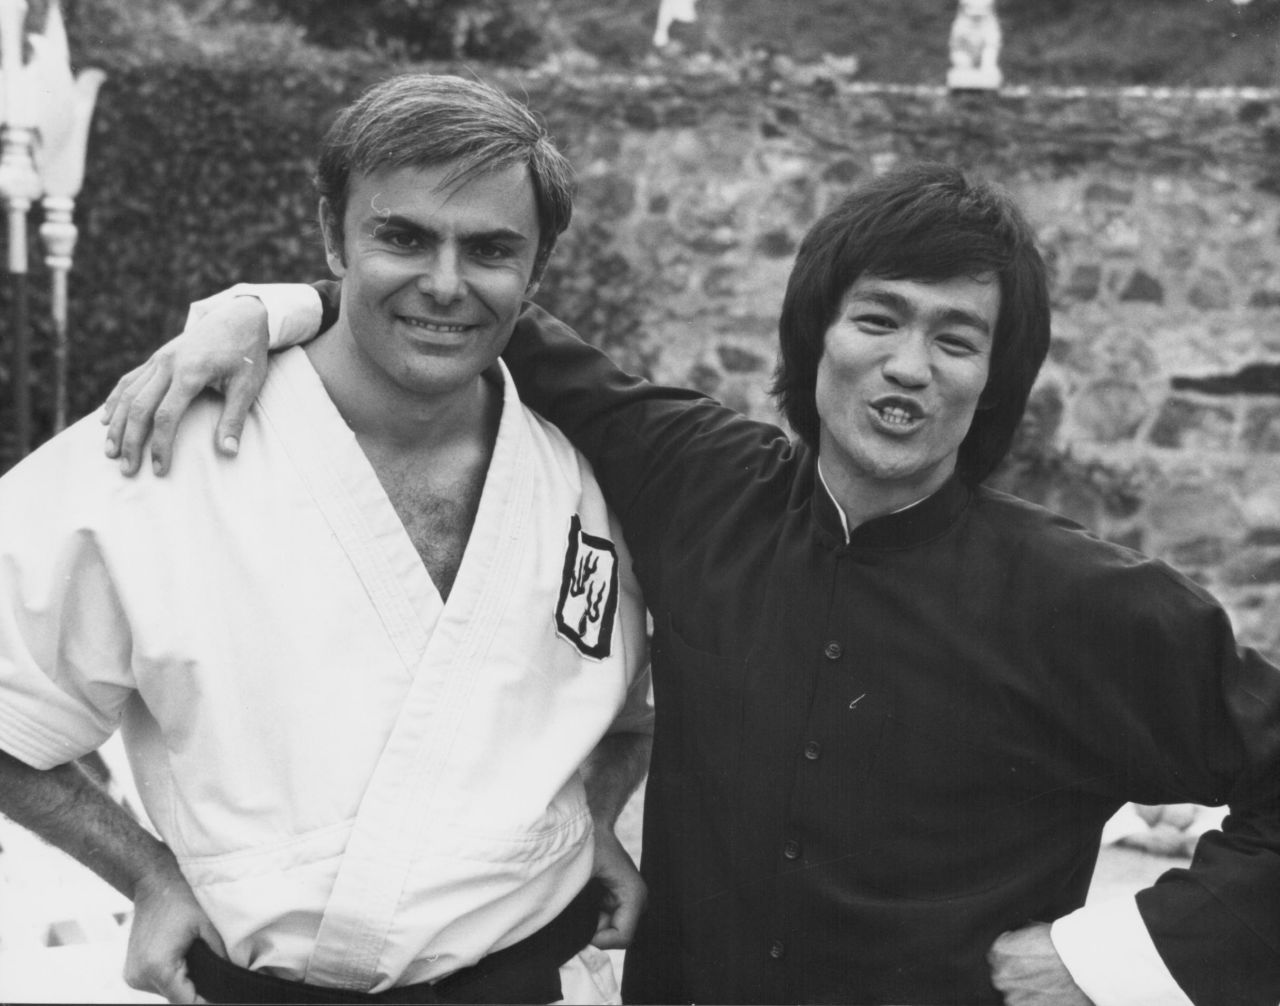 Actor <a href="https://www.cnn.com/2020/07/26/entertainment/actor-john-saxon-dies-trnd/index.html" target="_blank">John Saxon</a>, who starred opposite Bruce Lee in the classic film "Enter the Dragon," died July 25 at the age of 83, his wife told CNN. Saxon starred in nearly 200 movies and TV shows. He won the Golden Globe Award for new star of the year in 1958.